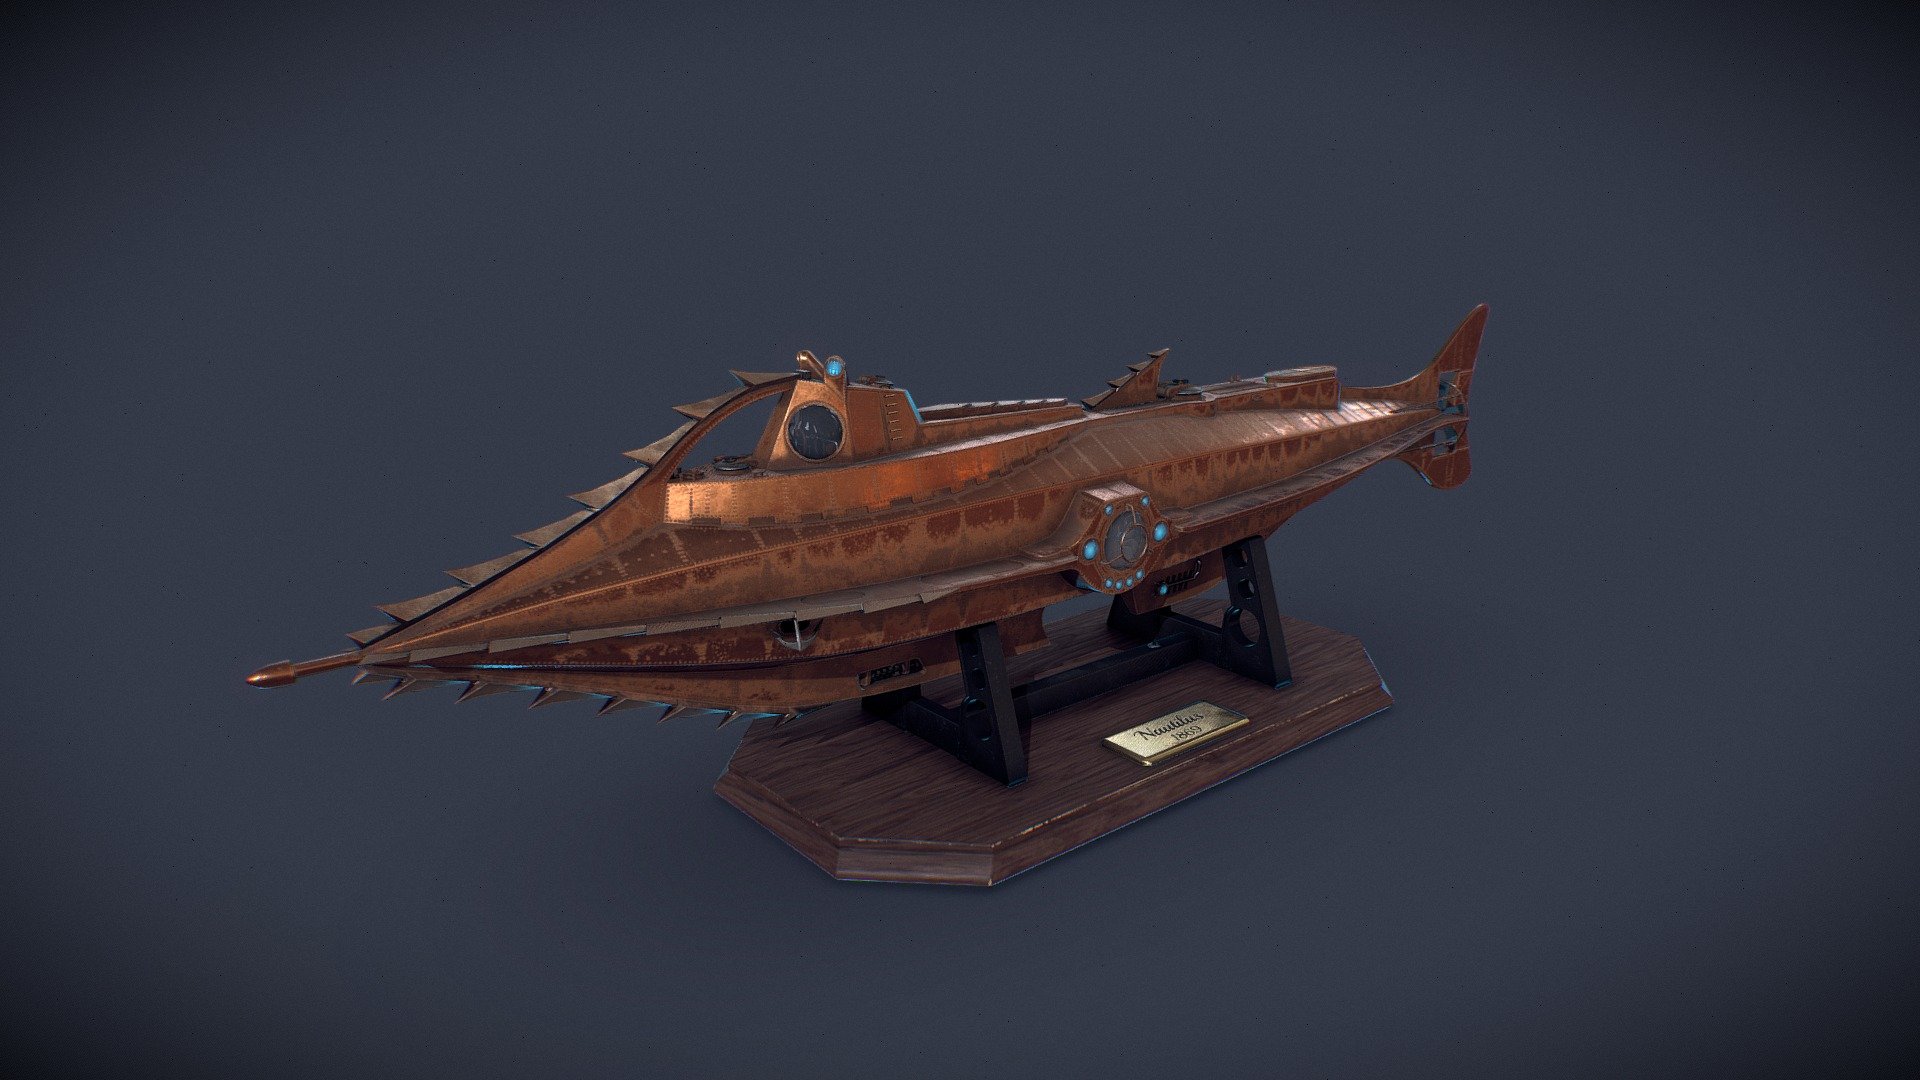 Hello Everyone ! This is an asset made for a personal project of a victorian scenary. Being fan of Jules Verne stories such as 20.000 leagues under the sea and of the amazing concept of submarine Nautilus, always loved the model that you could visit in DisneyLand Paris also,  I made a version of it to decorate my scenary :)

Made with Maya, PS and Substance.

You will find in the package Scene file, FBX and 4k Textures.
If you have any customs need, please feel free to contact me 3d model